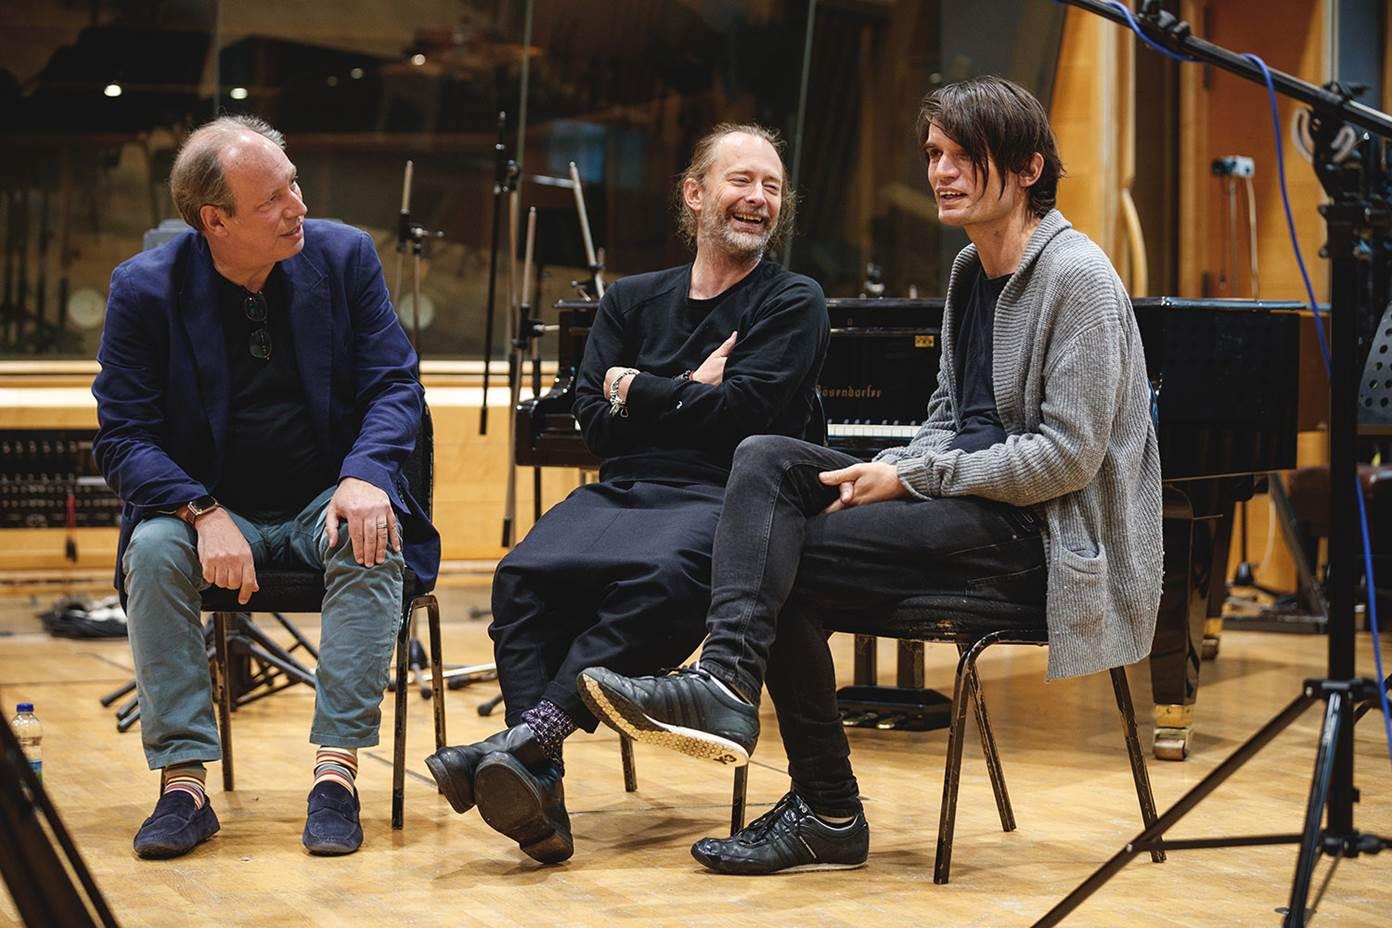 Hans Zimmer worked with Radiohead’s Thom Yorke and Johnny Greenwood on the ‘Blue Planet II’ prequel theme